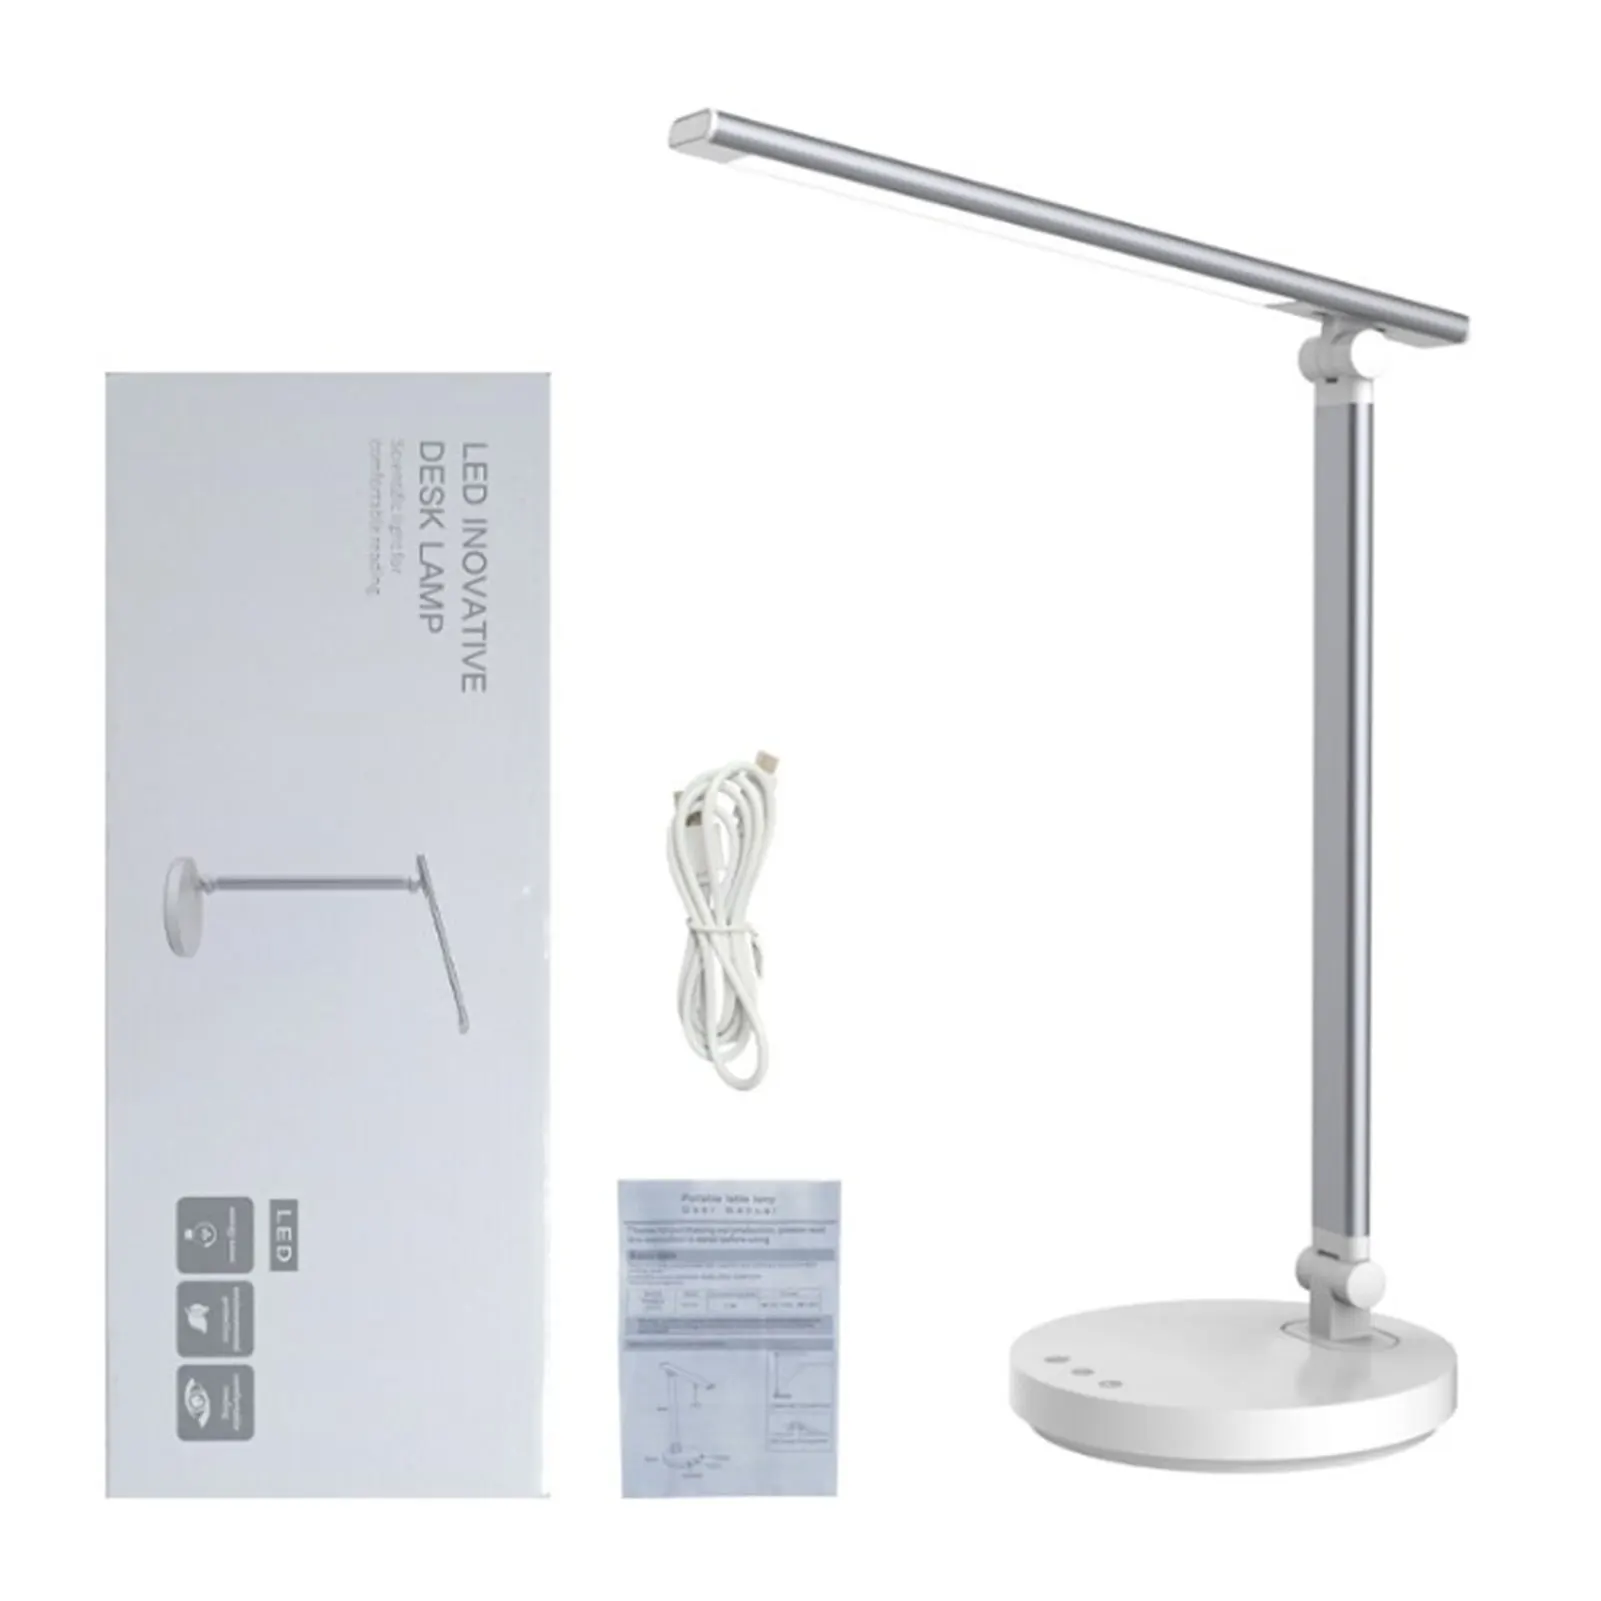 

Office USB Powered Home Touch Control Eye Caring Timer Dimmable 5 Lighting Modes Kids Led Studying Sleeping Desk Lamp